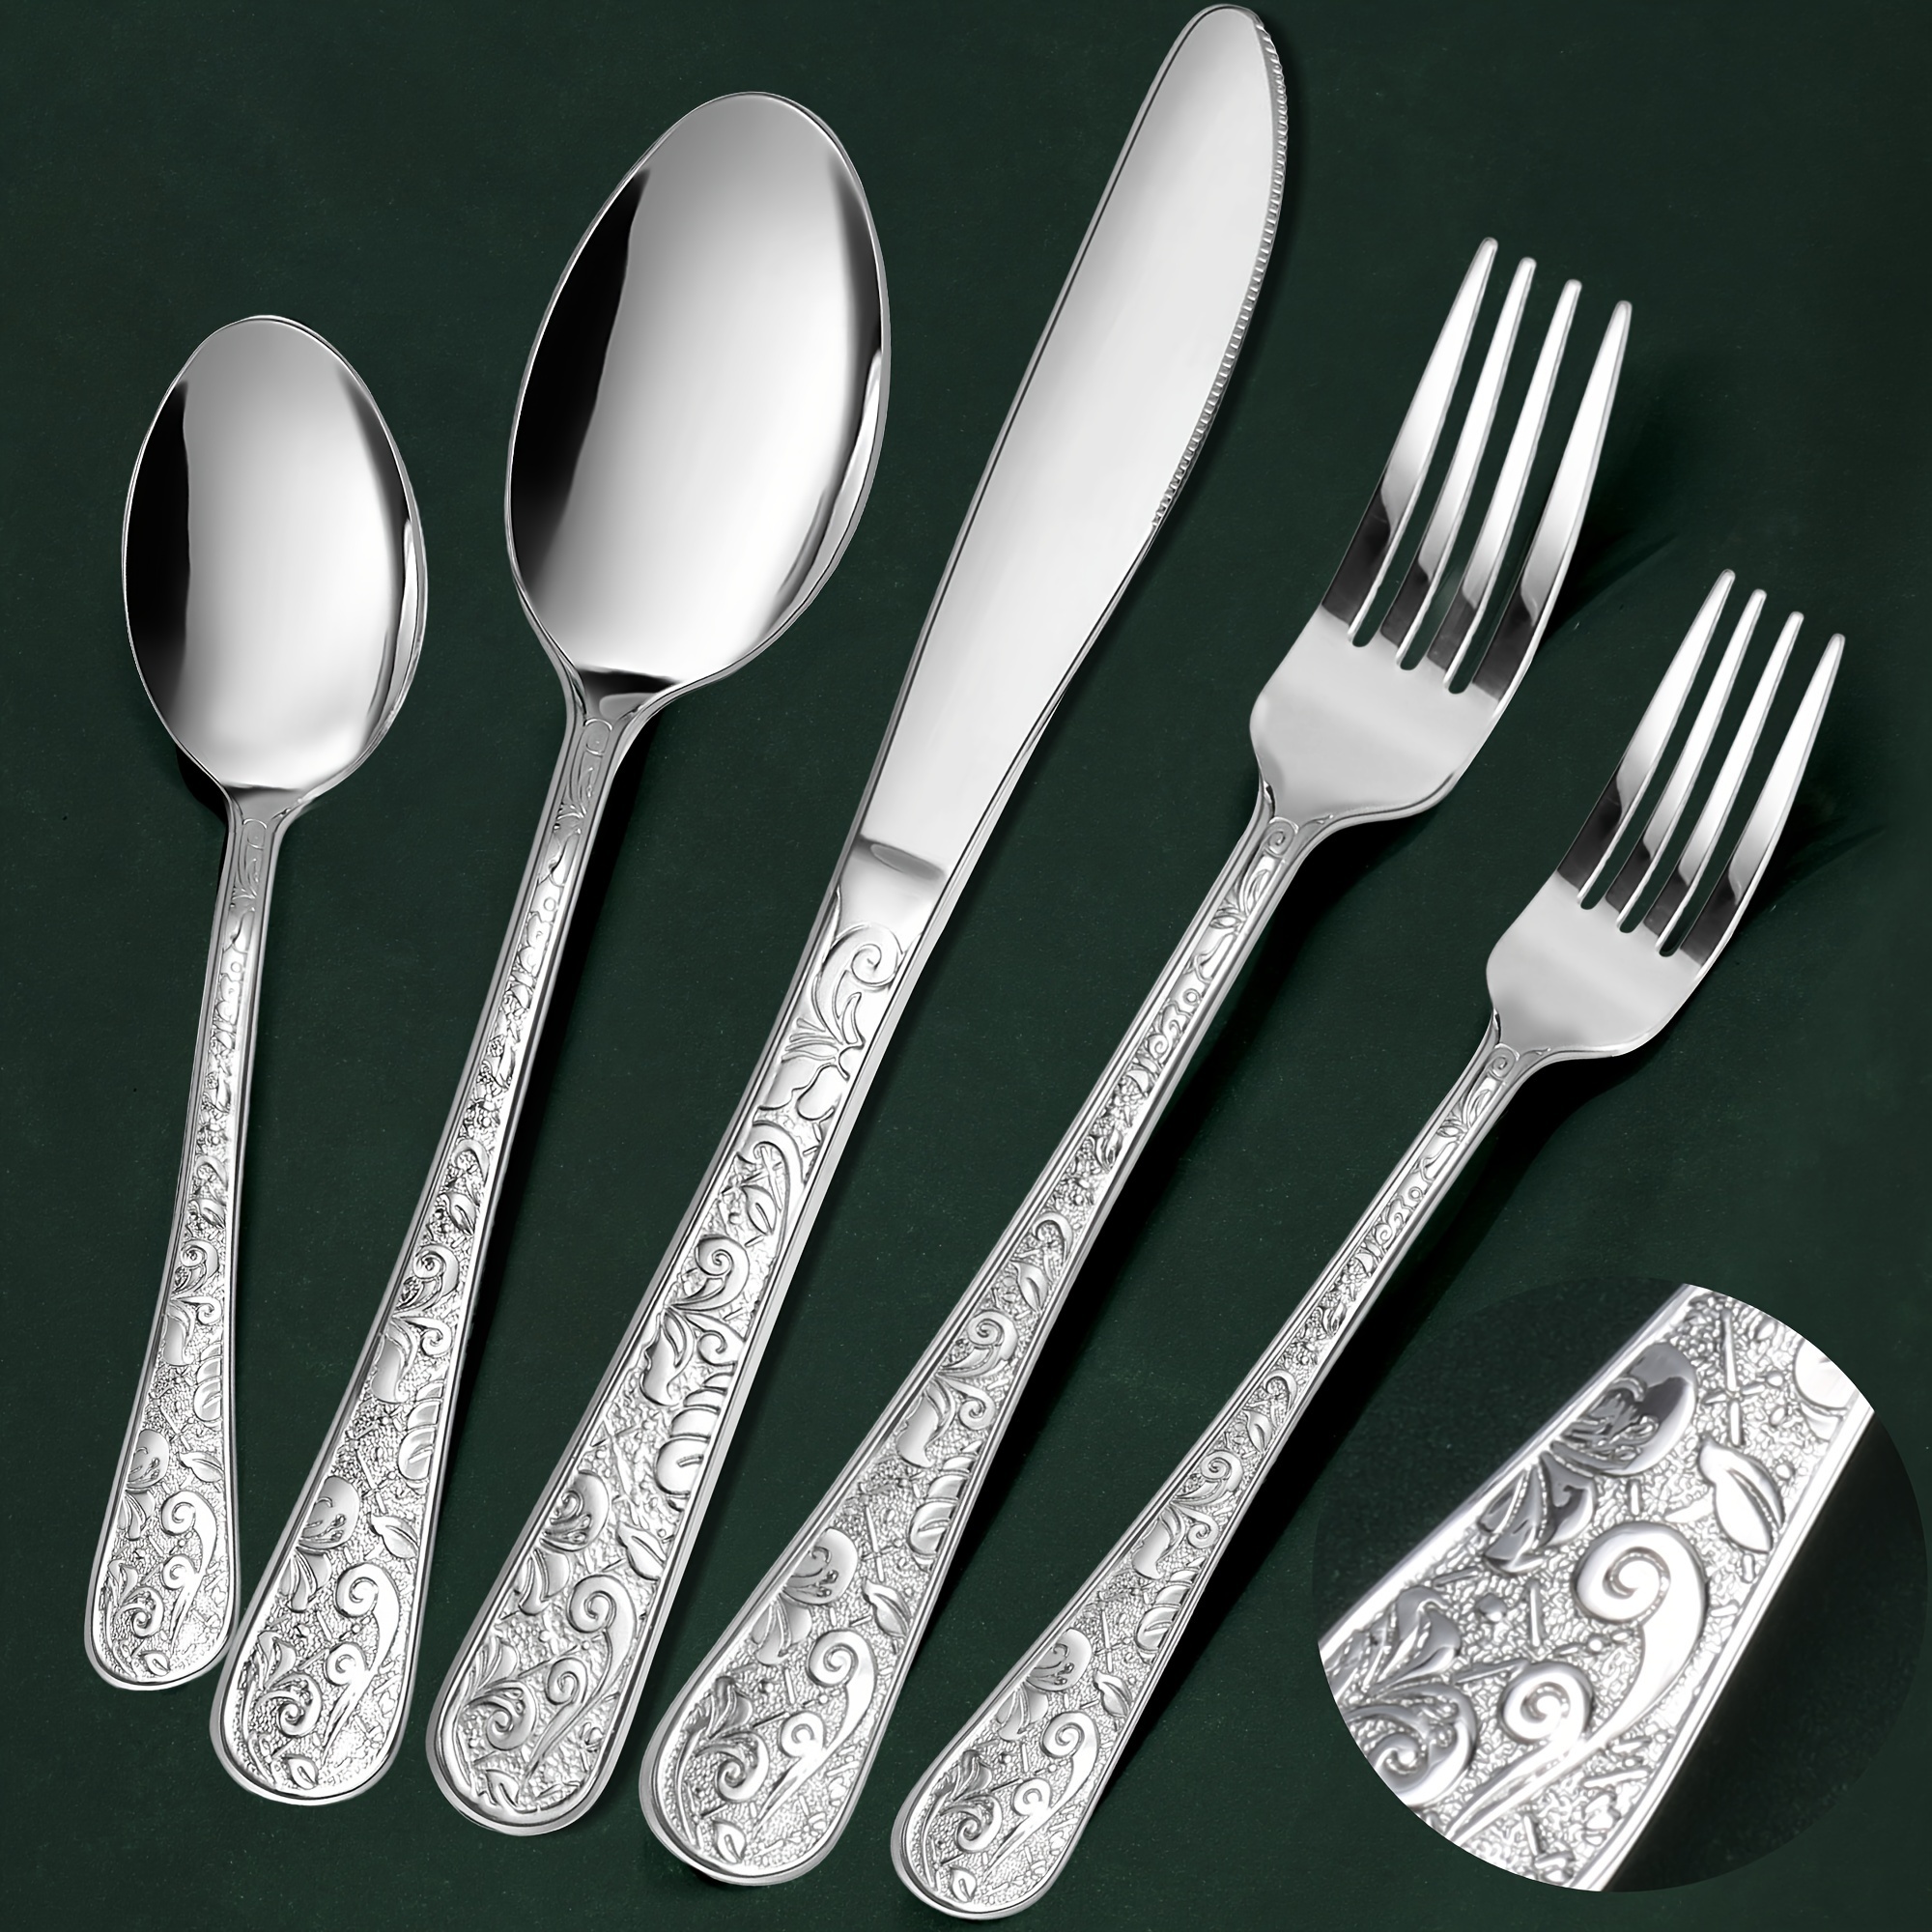 

40-piece Vintage Carved Silverware Set For 8, Cutlery Set For Home And Kitchen, Stainless Steel Flatware Set With Knife/fork/spoon, Utensil Set With Dishwasher Safe